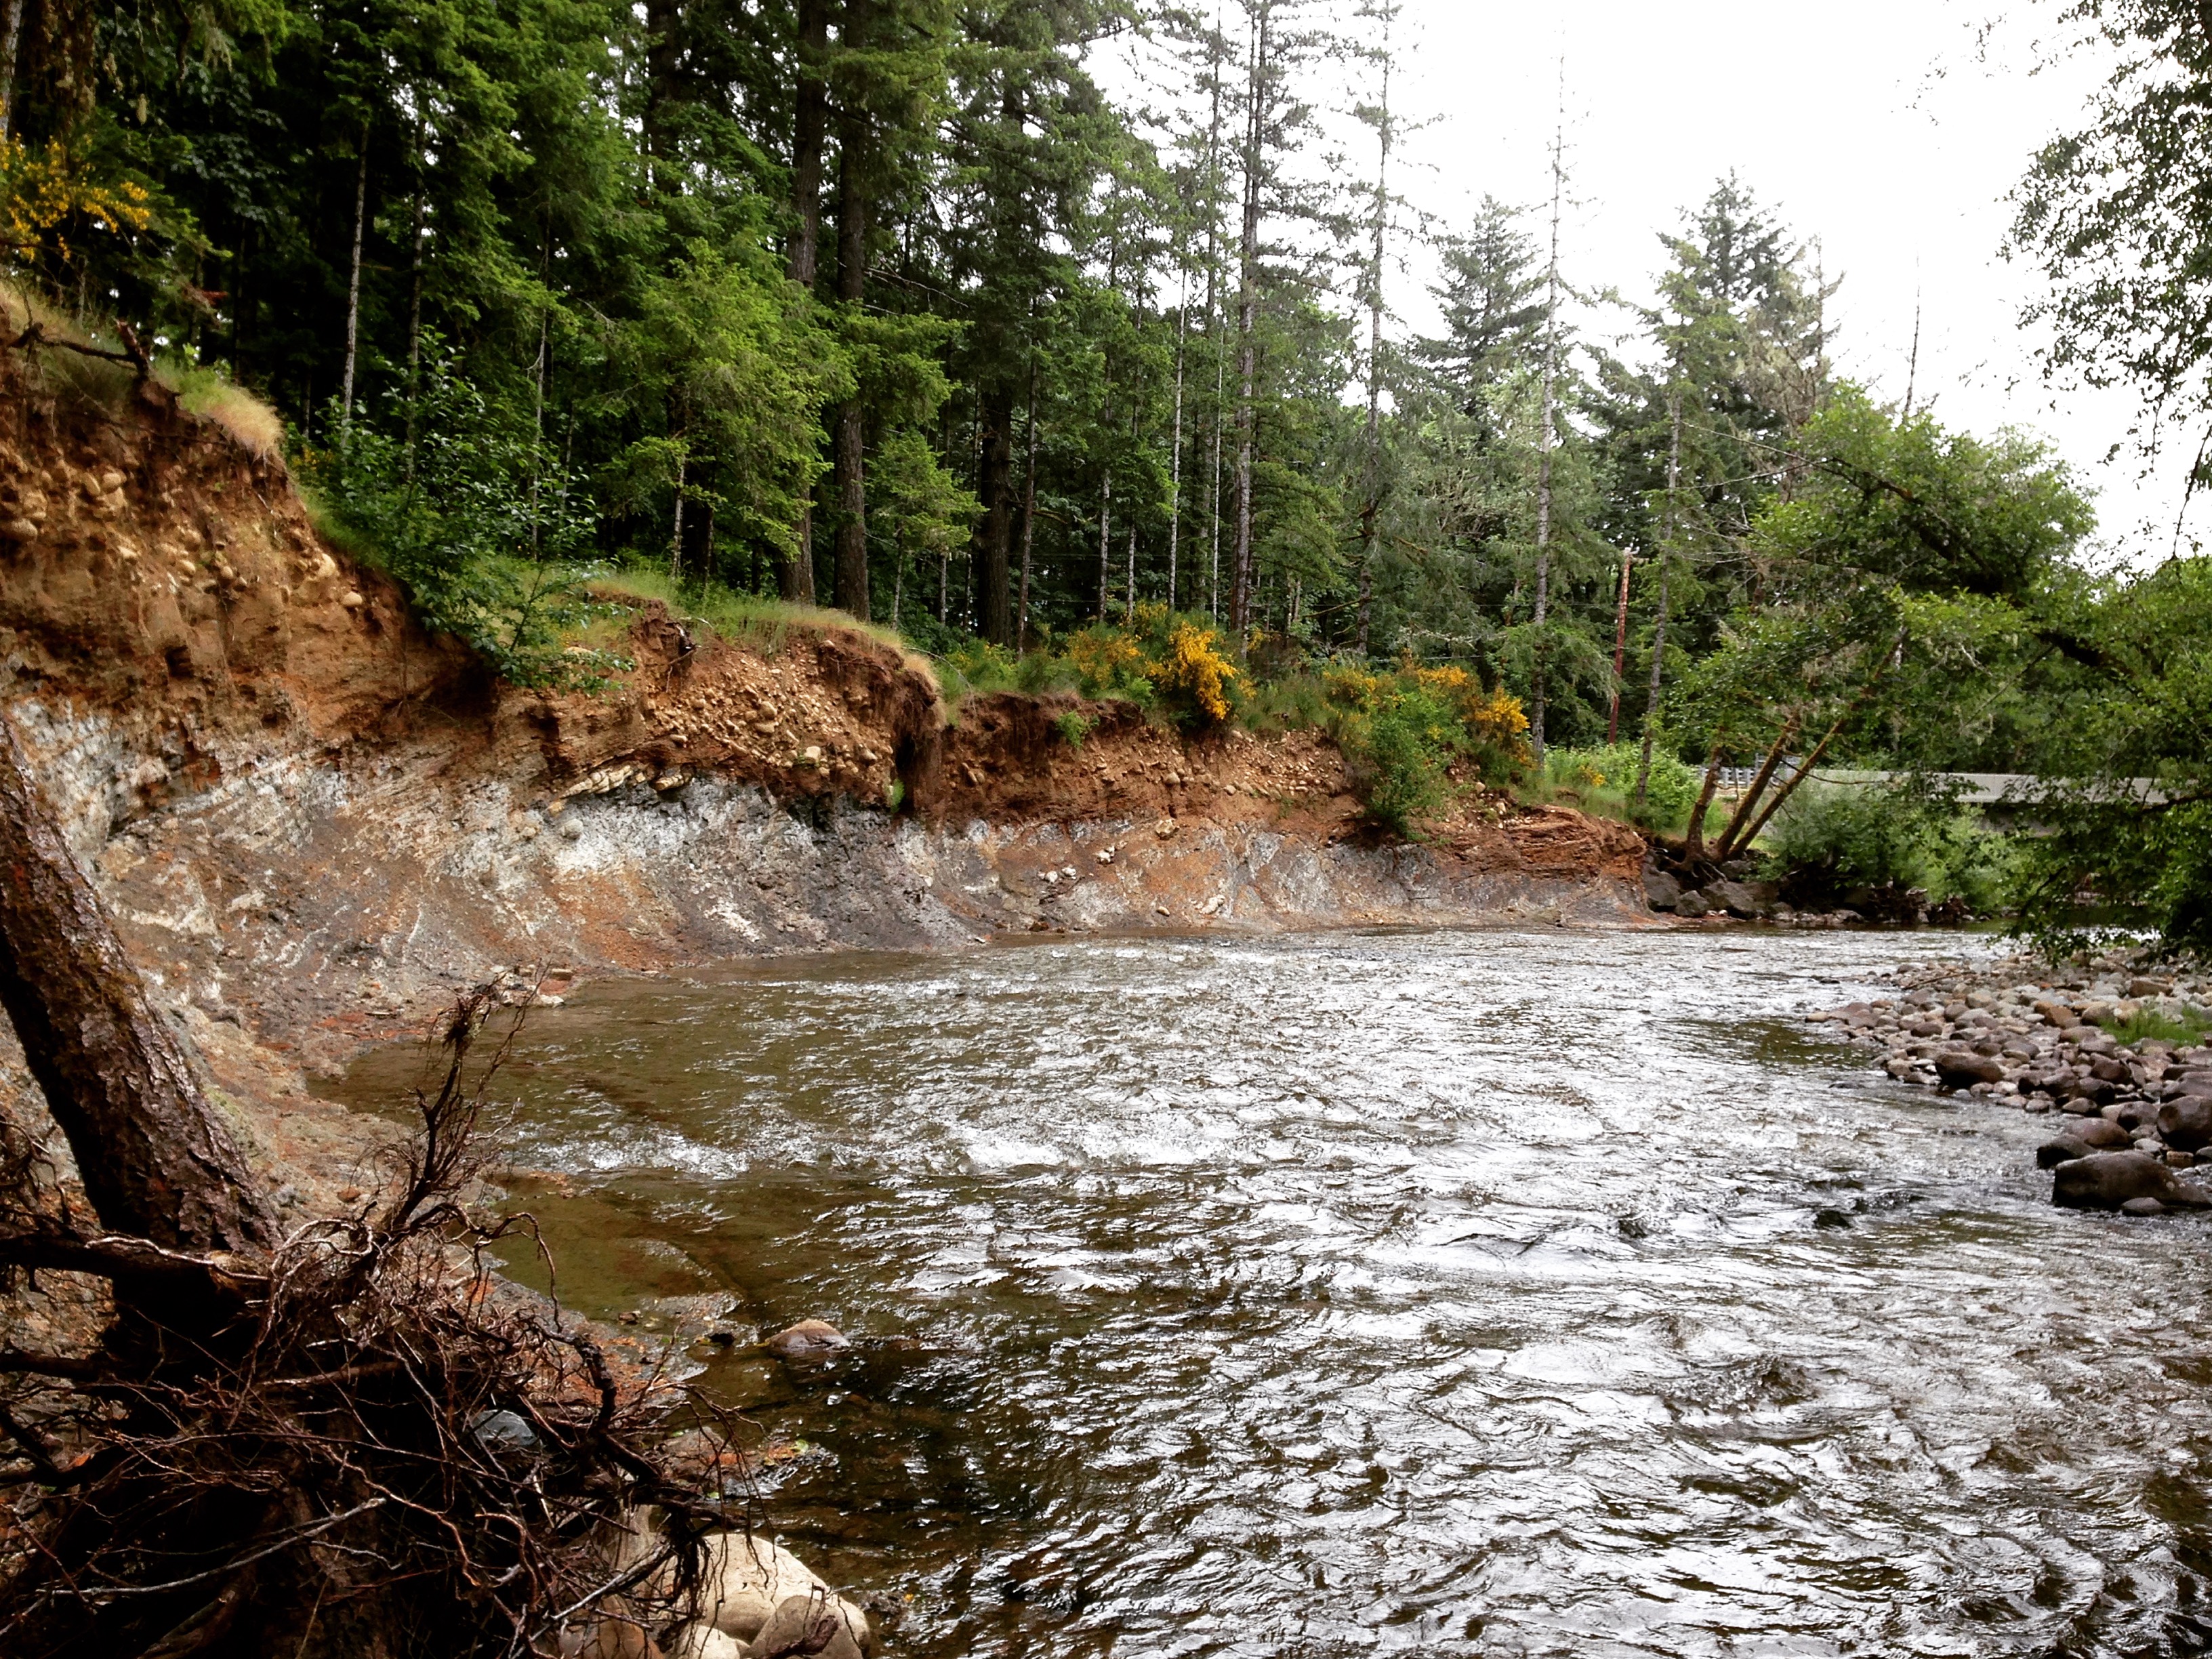 A meandering bedrock river near the Oregon field site — on the left you can see the banks made of bedrock, with some river gravel on top. The river is migrating to the left, and as a consequence, has eroded away the right bank, leaving behind a small cobble bar but no defined bank.